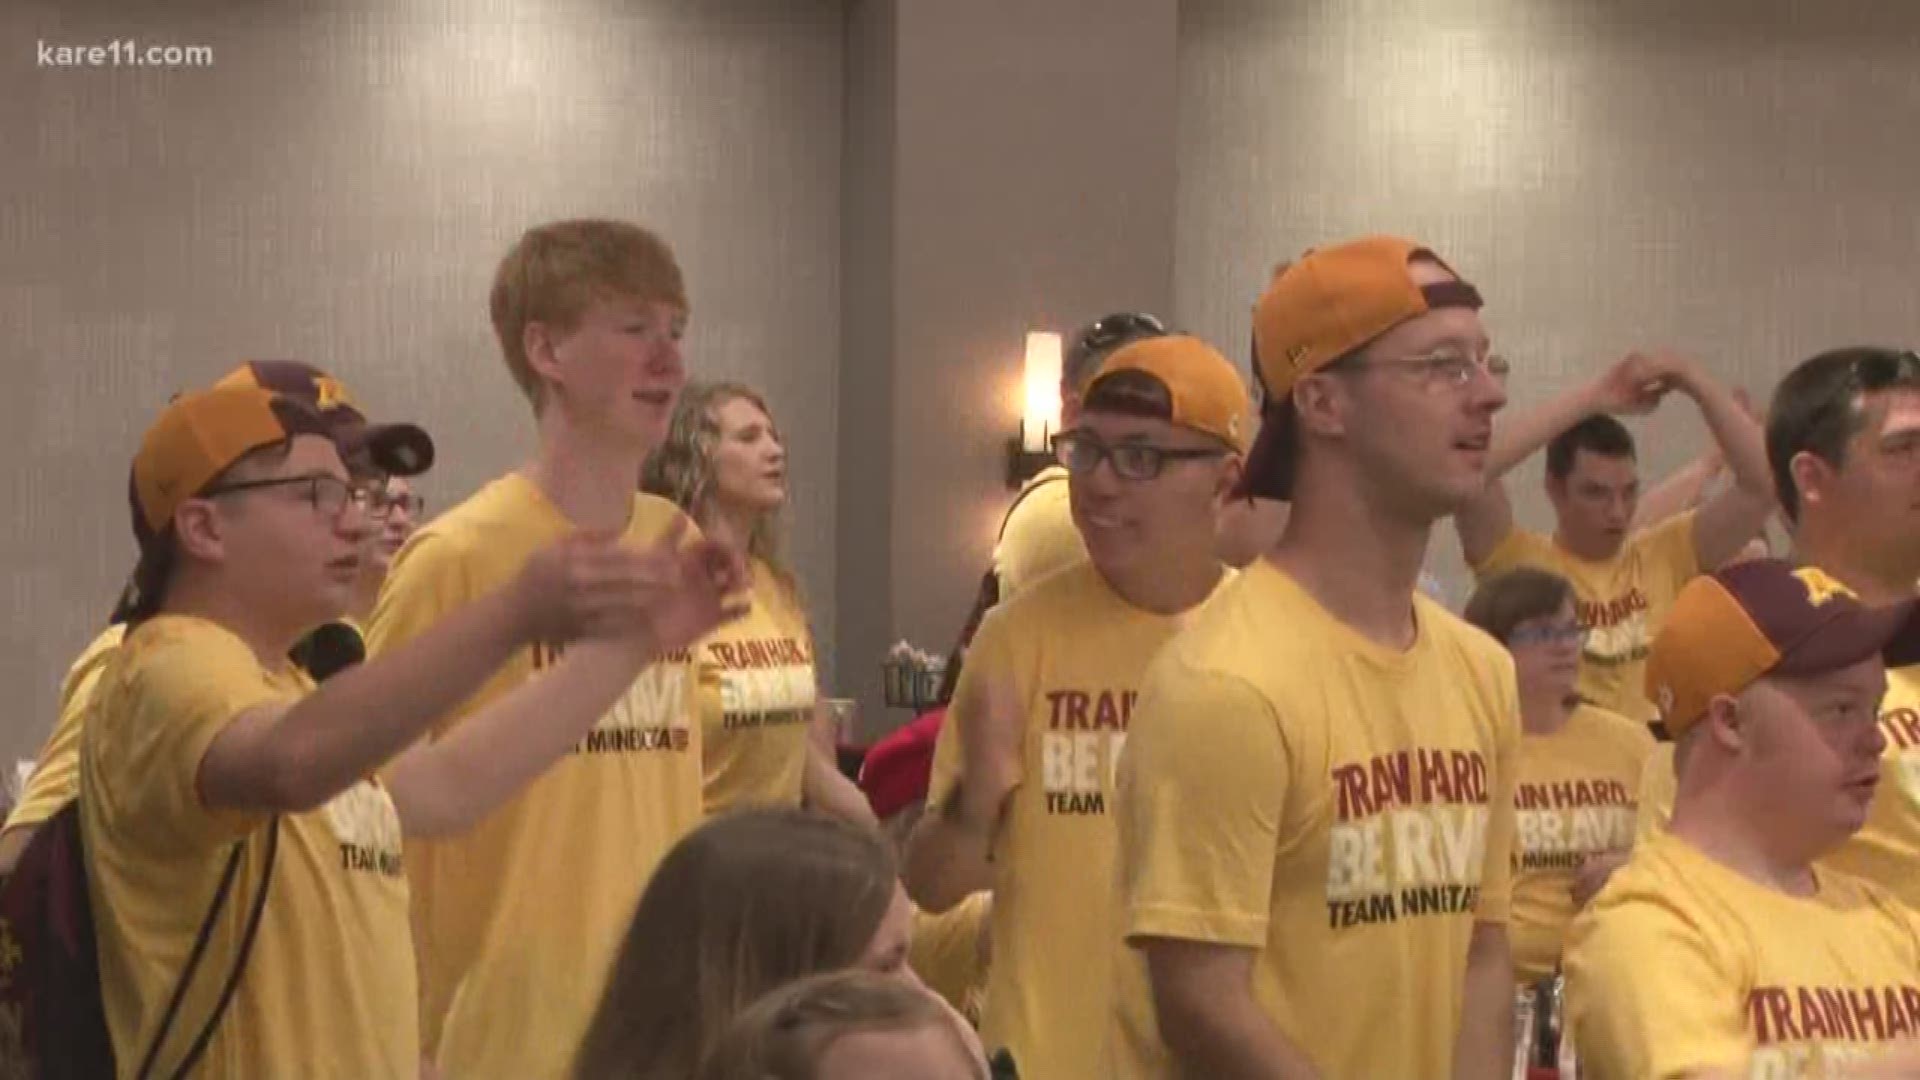 Dozens of Special Olympics athletes, unified partners, coaches and staff were sent off Saturday morning to Seattle for the 2018 USA Games. They will compete in 14 team and individual sports alongside thousands of other Special Olympics athletes from acros